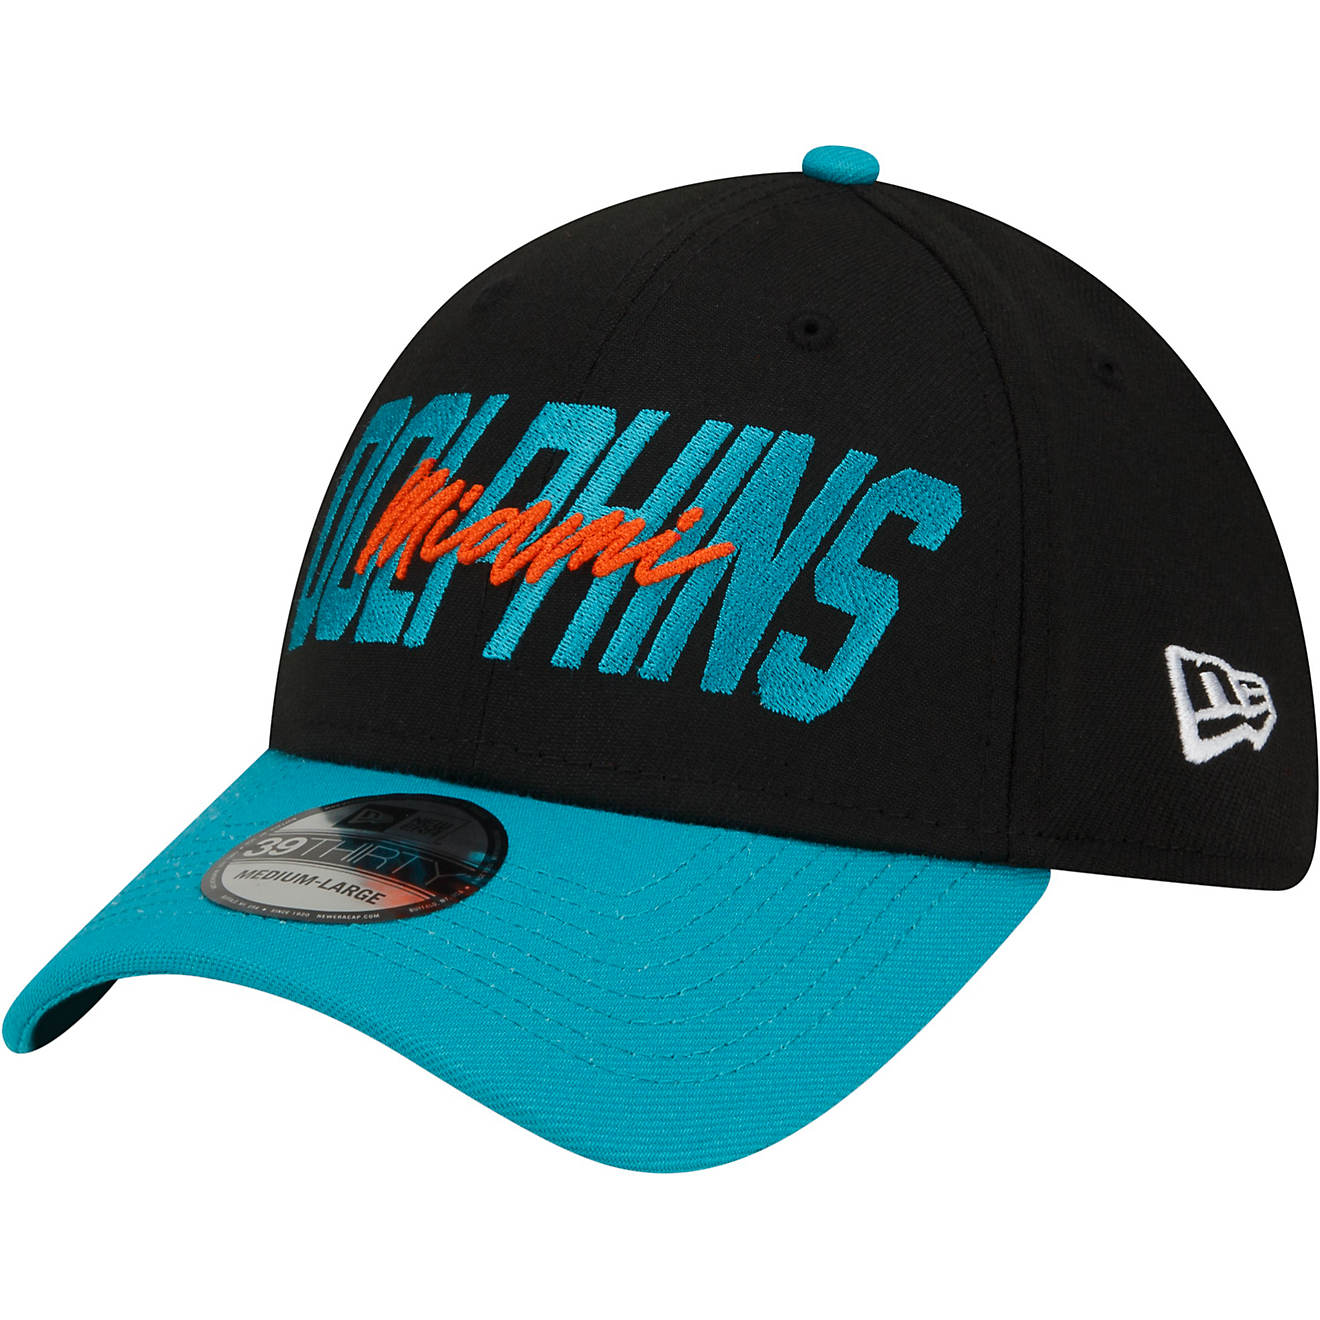 New Era Men's Miami Dolphins NFL Draft 22 39THIRTY Cap                                                                           - view number 1